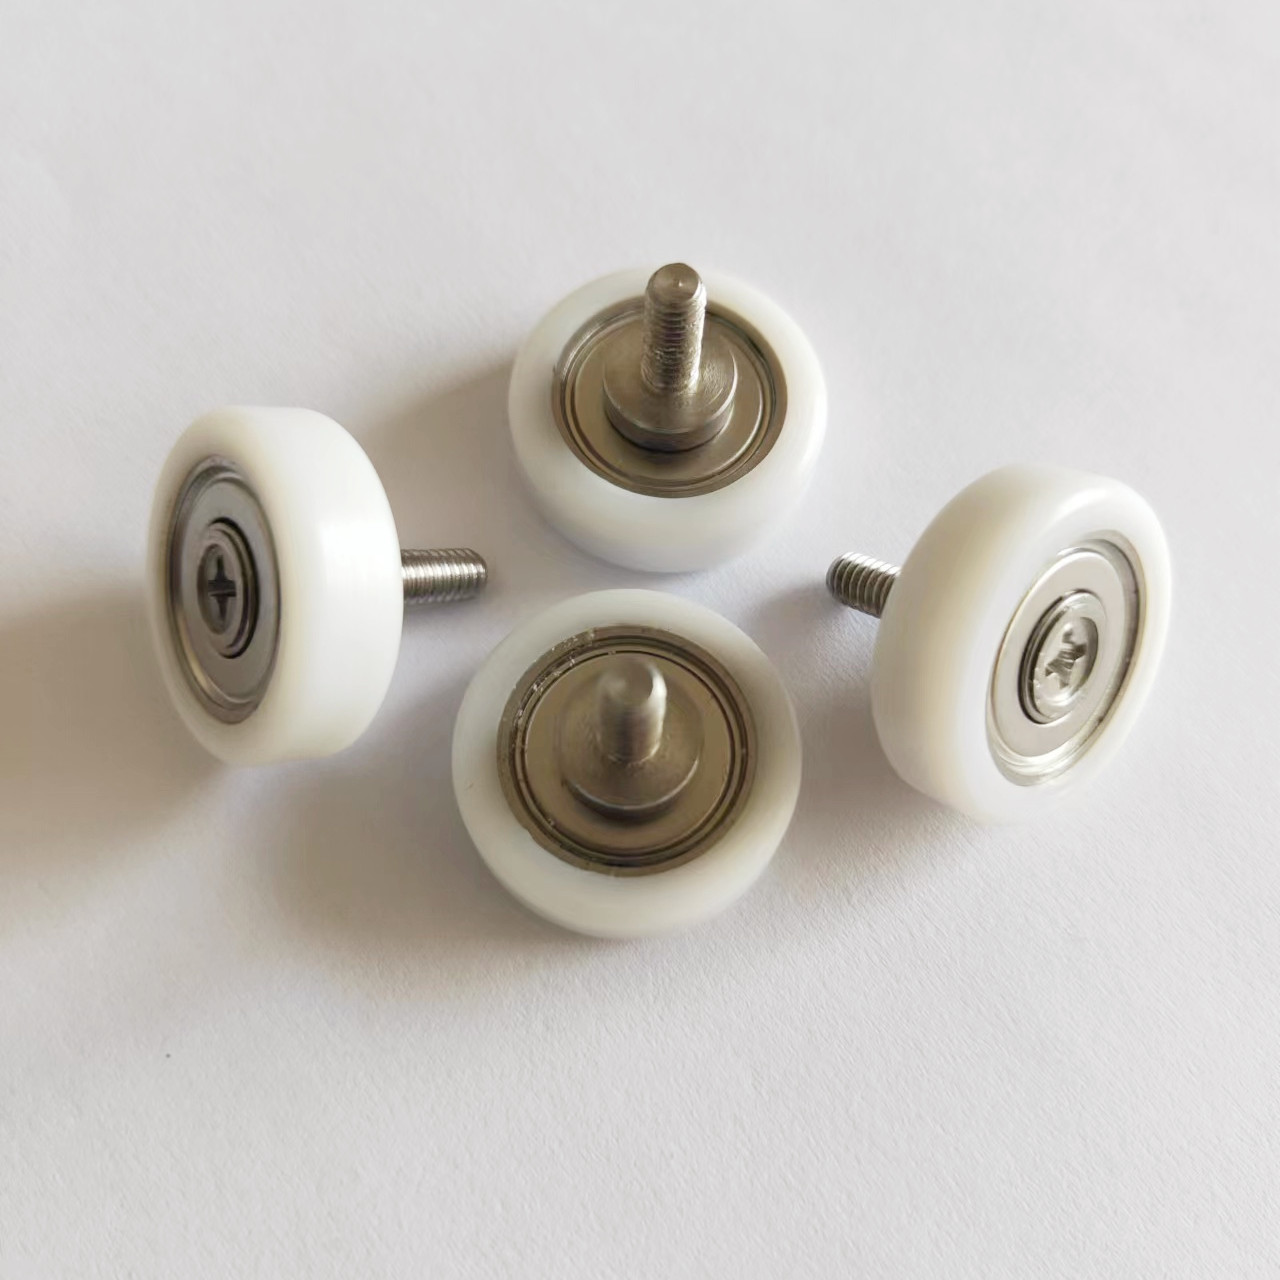 Hot Sale New Developed Refrigerator Sliding Wheel 304 Stainless Steel Pulley with Stainless Steel Bolt